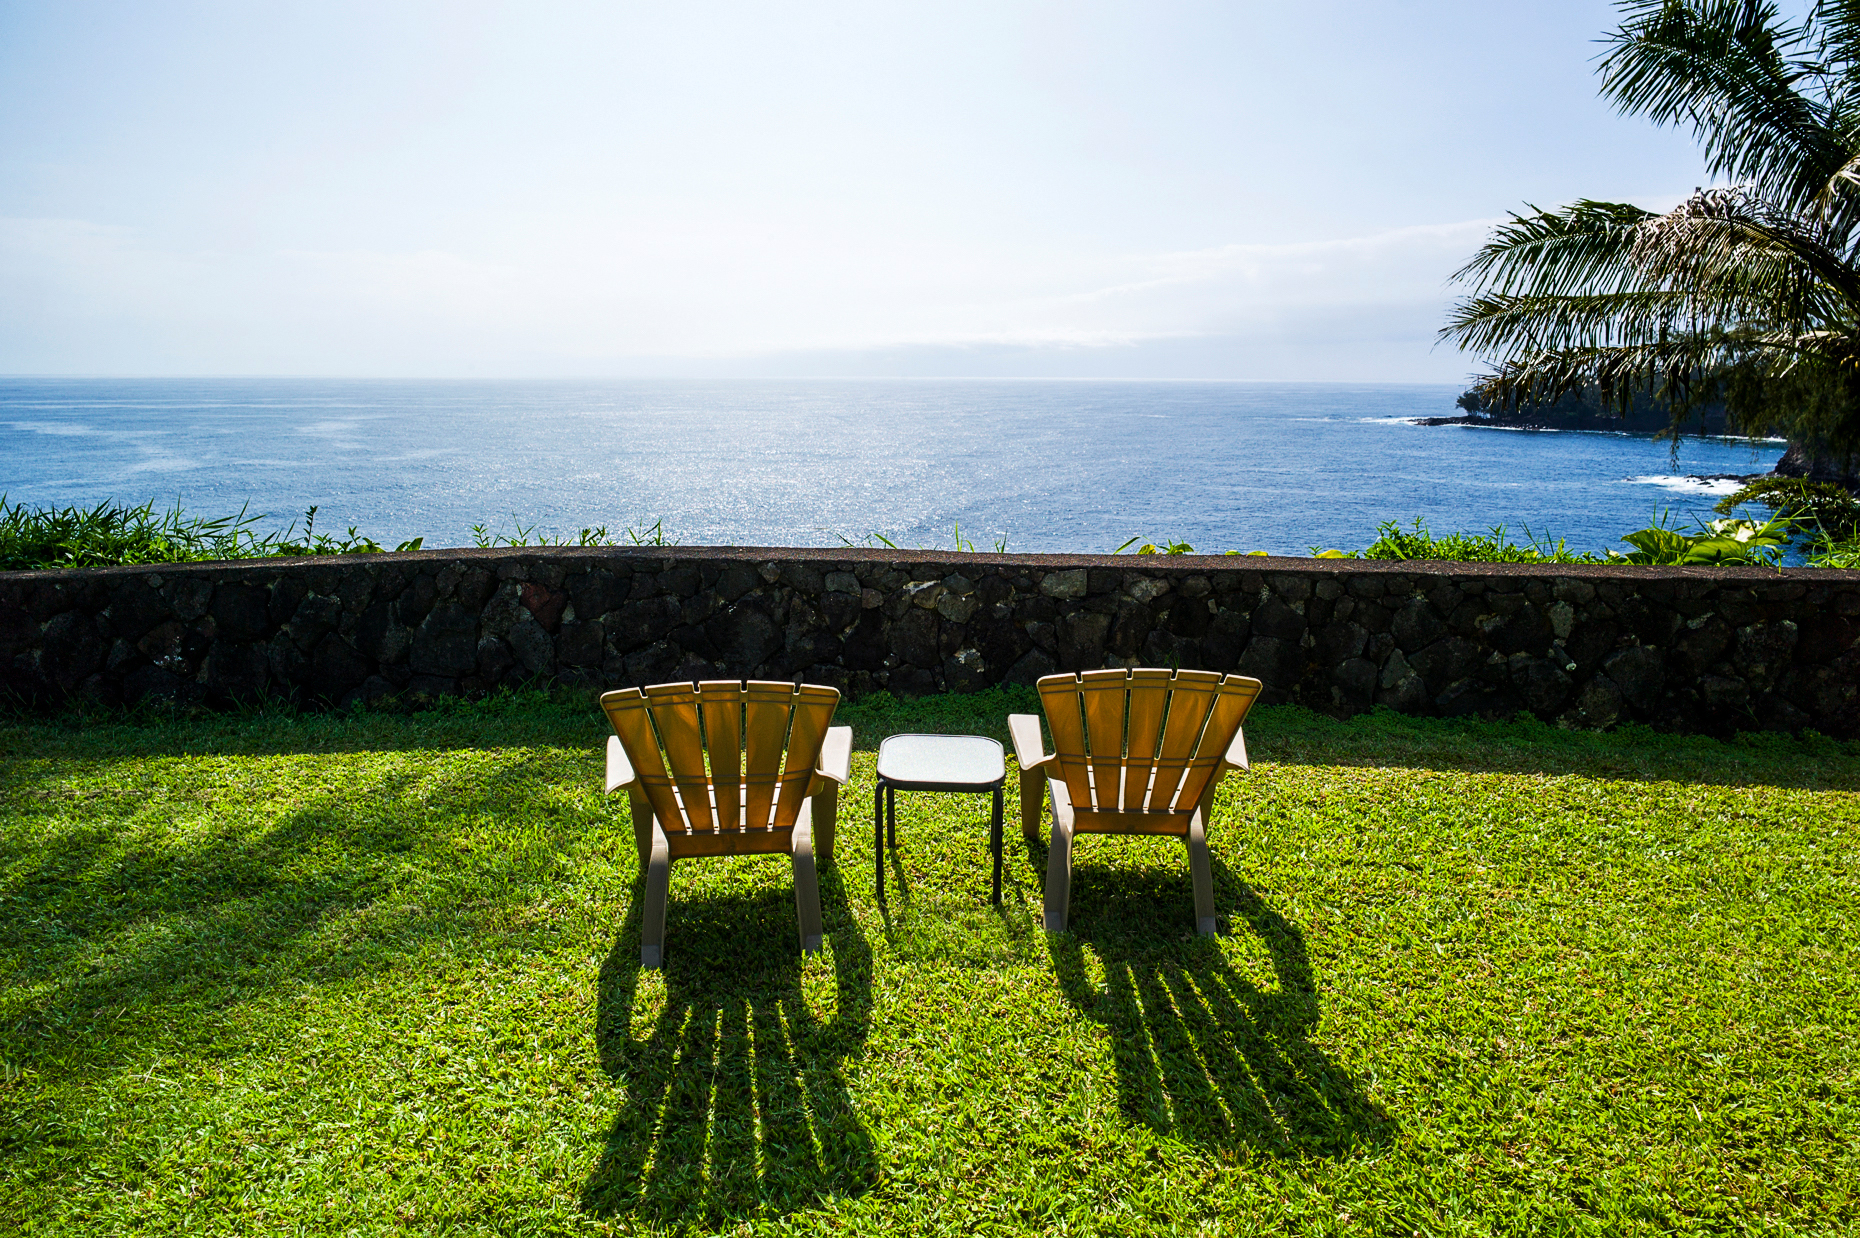 Pacific Ocean view from The Palms Cliff House inn lawn, Honomu, The Big Island of Hawai